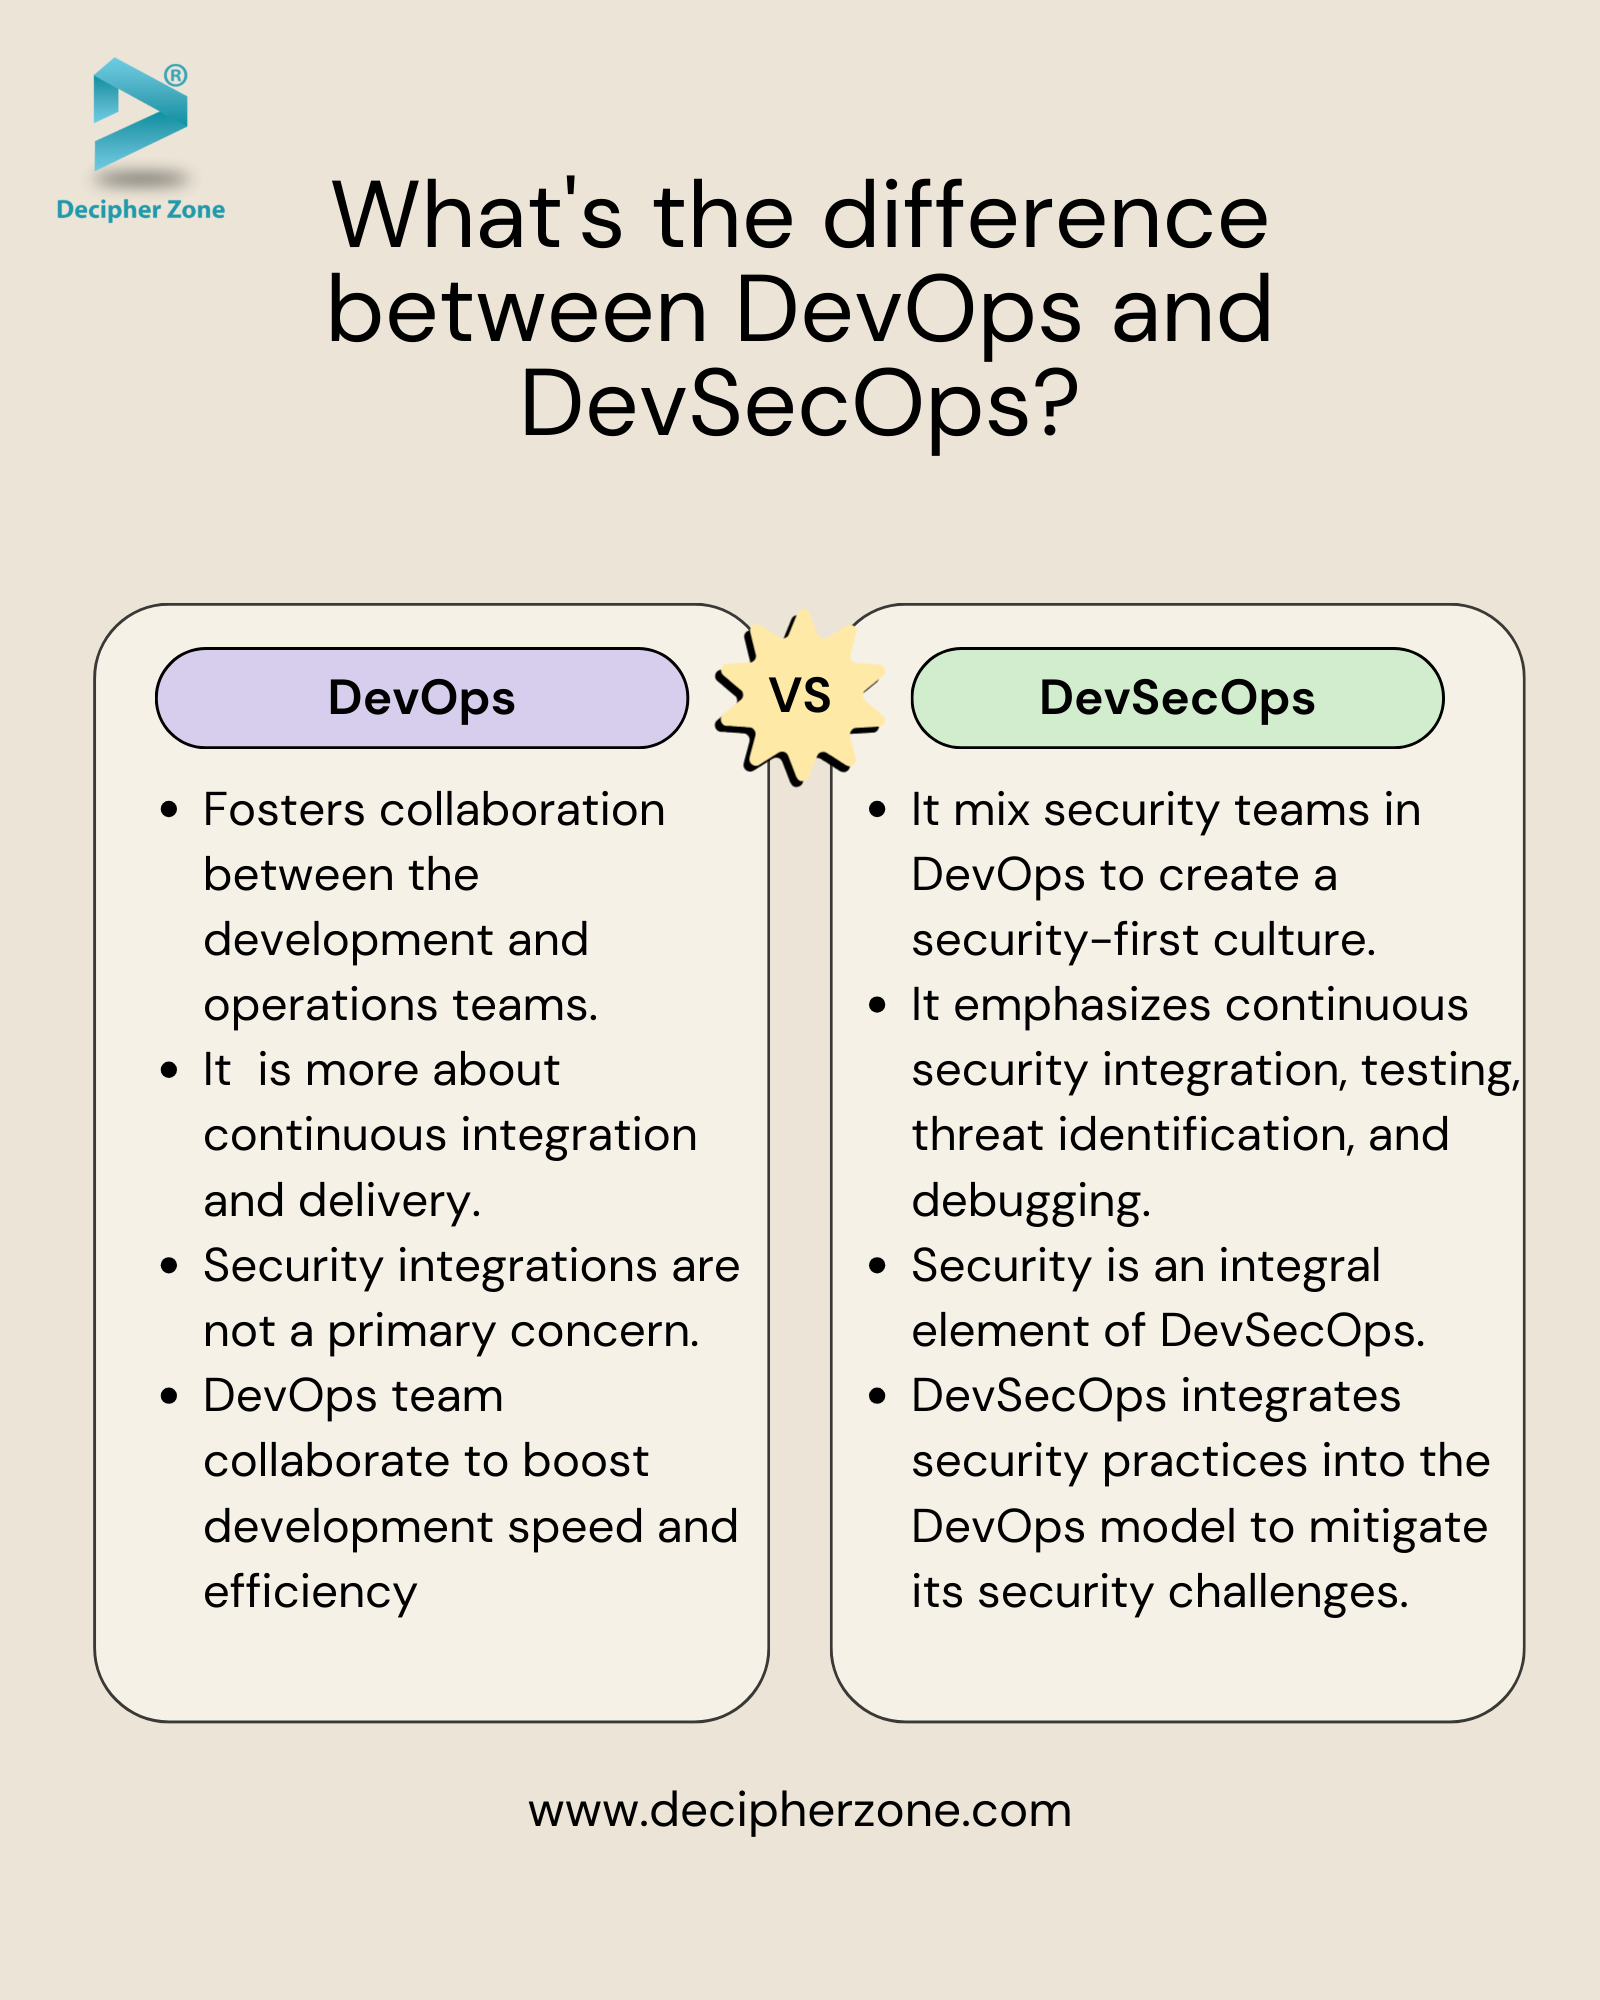 similarities and differences between DevOps and DevSecOps